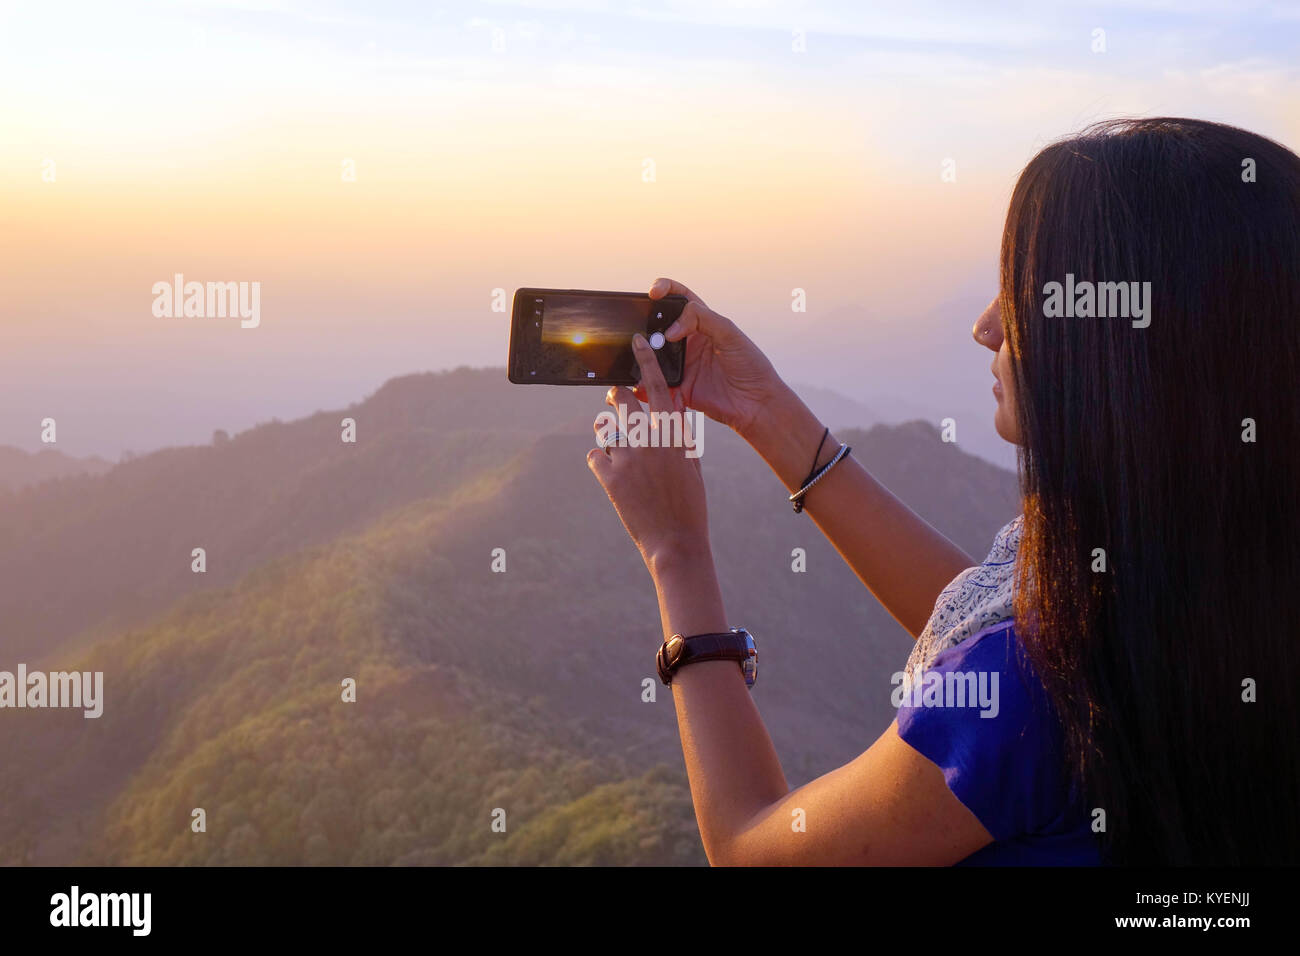 A Indian young  women taking photograph of sunrise using a mobile phone rear camera. Stock Photo